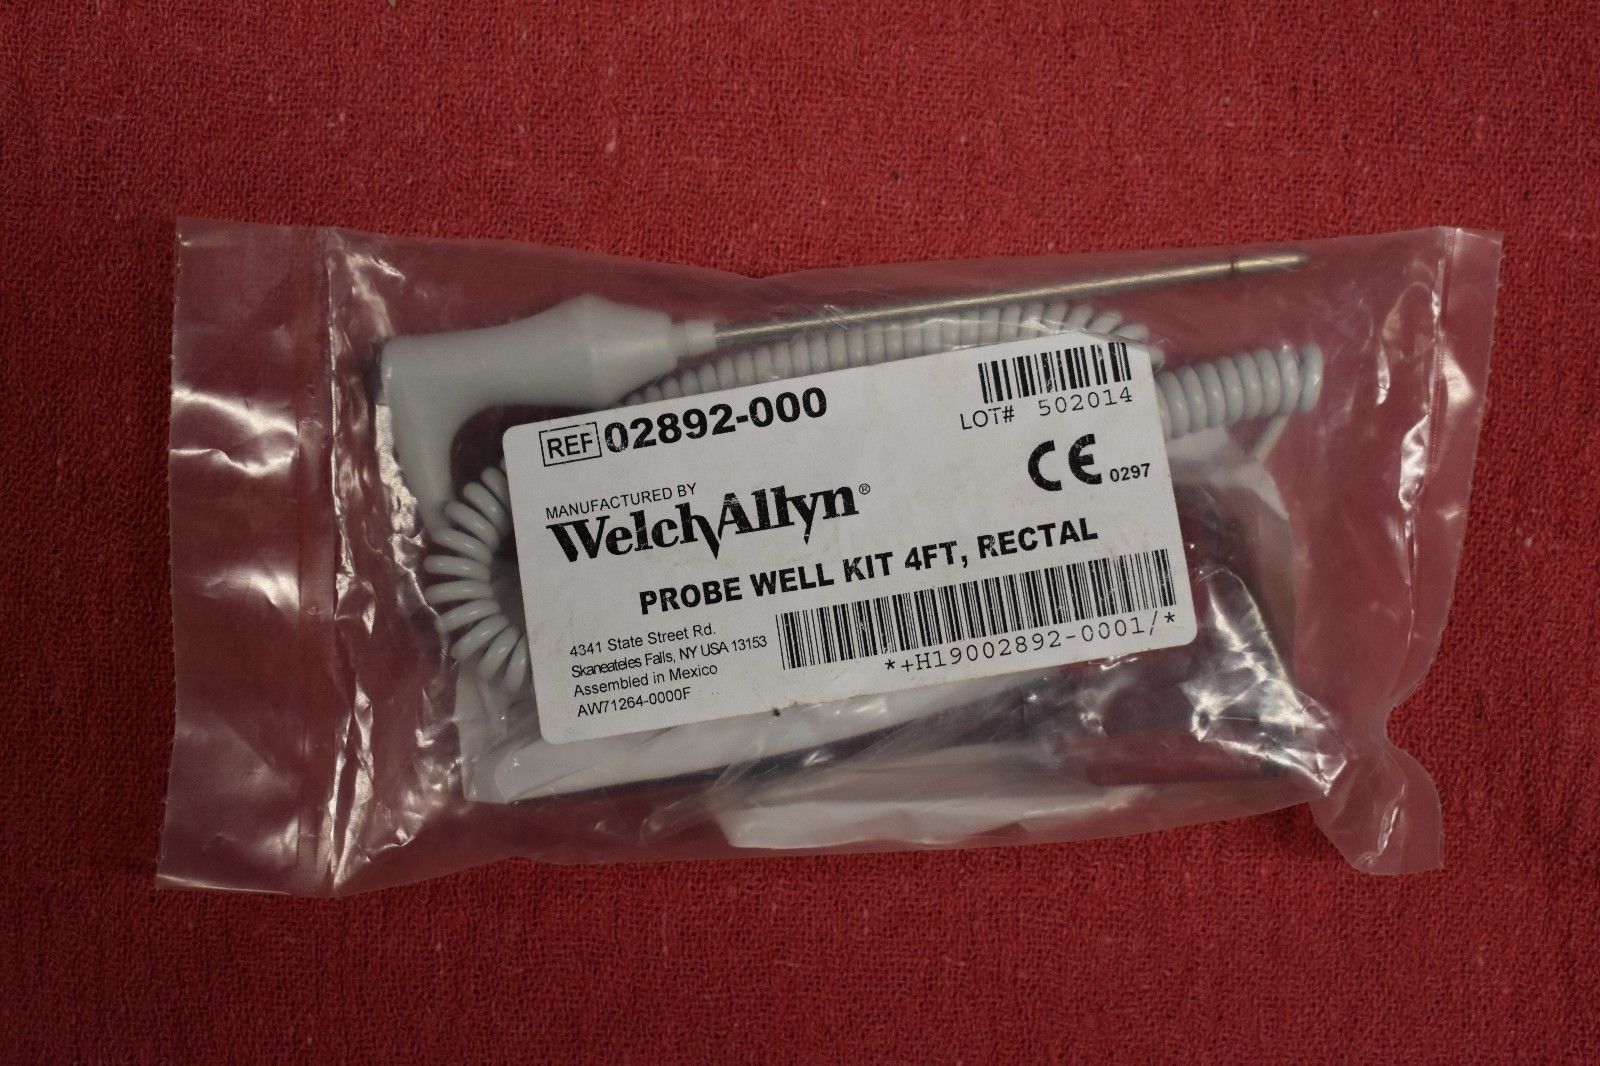 Welch Allyn 02892-000 4' Rectal Probe Well Kit     ****FREE SHIPPING**** 732094026016 DIAGNOSTIC ULTRASOUND MACHINES FOR SALE